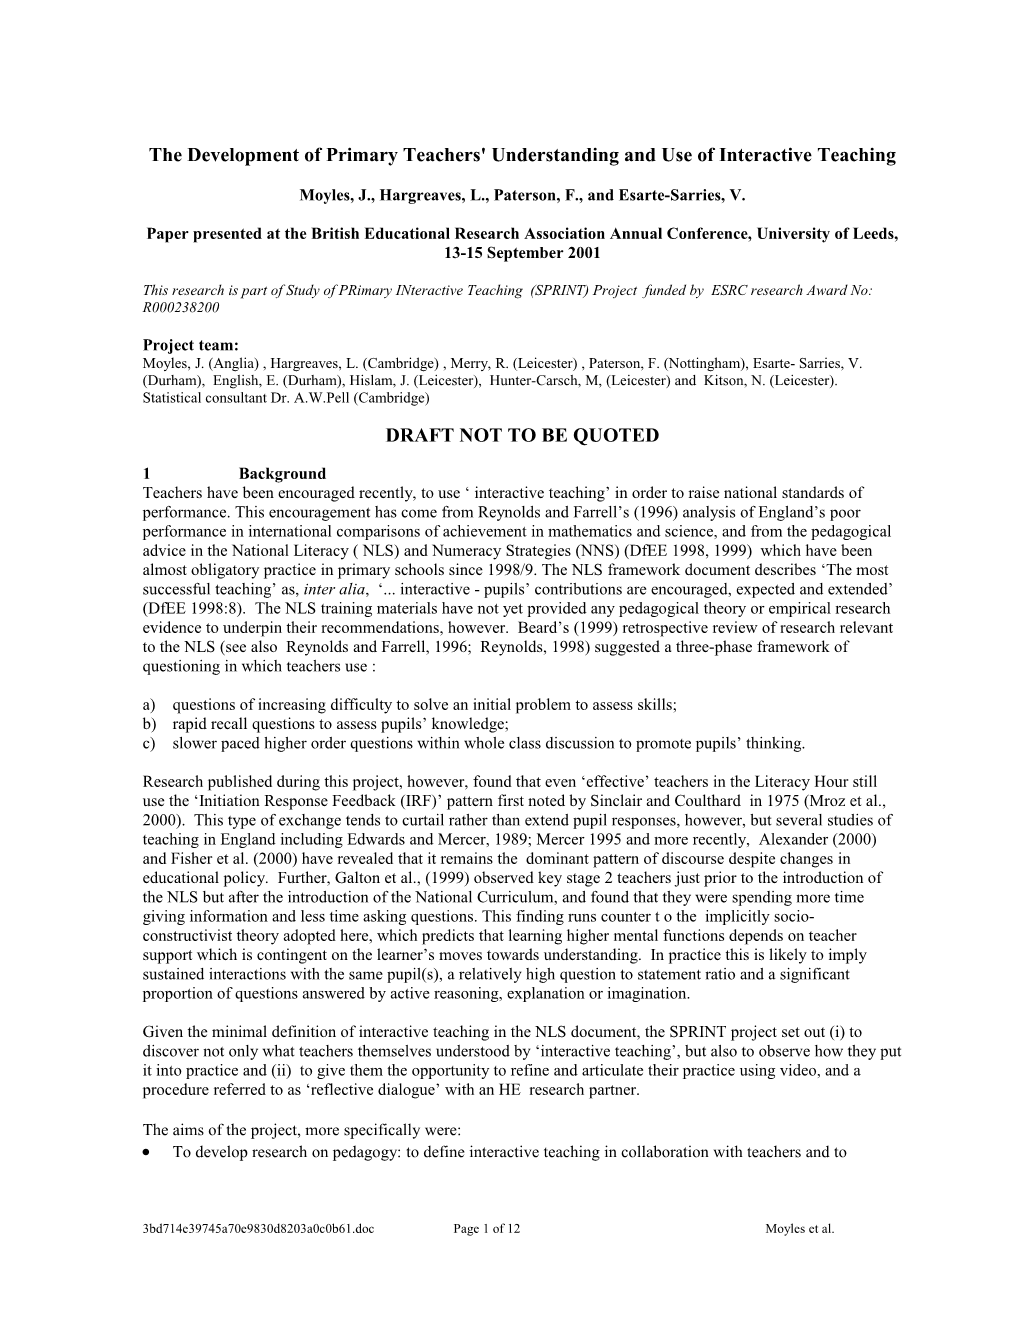 The Development of Primary Teachers' Understanding and Use of Interactive Teaching (R000 238200)